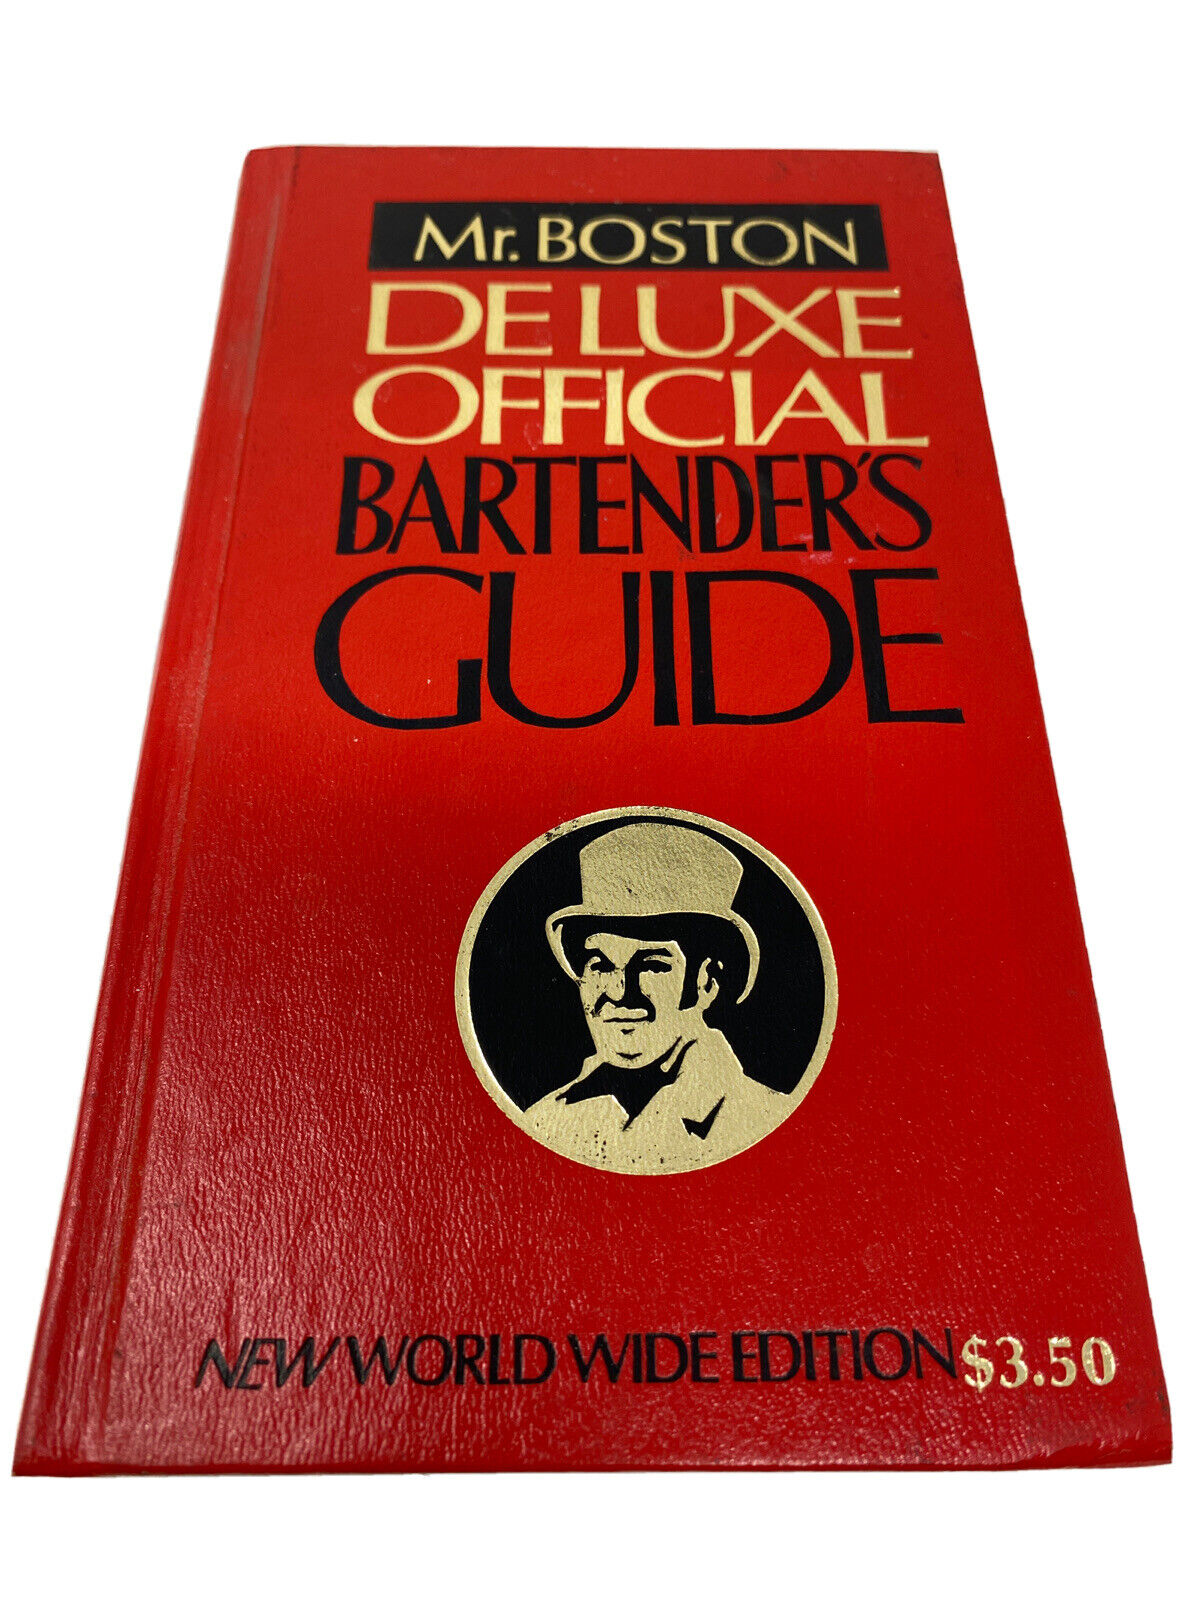 59th Printing (Jan. 1979) - Old Mr. Boston De Luxe Official Bartenders Guide